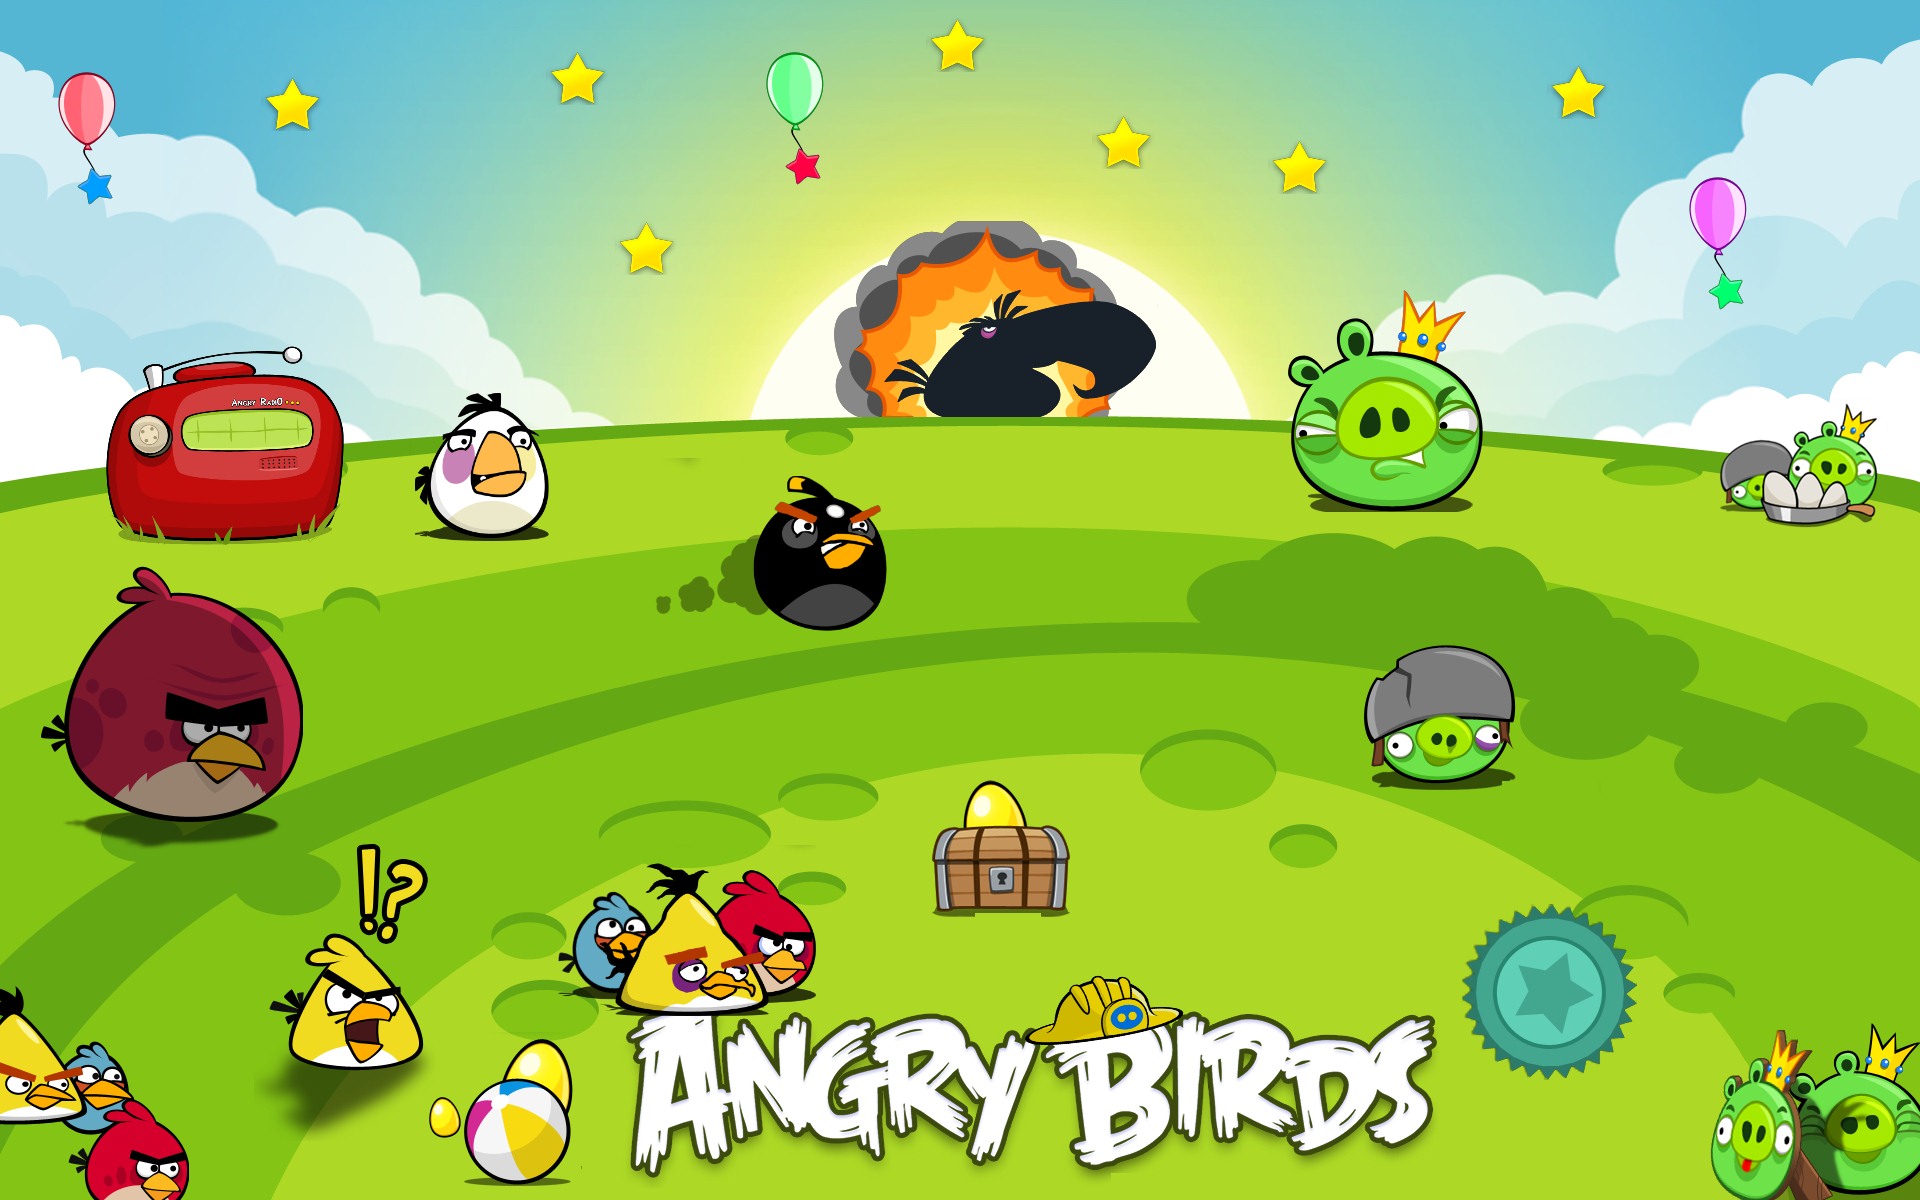 Angry Birds Game Wallpapers #12 - 1920x1200